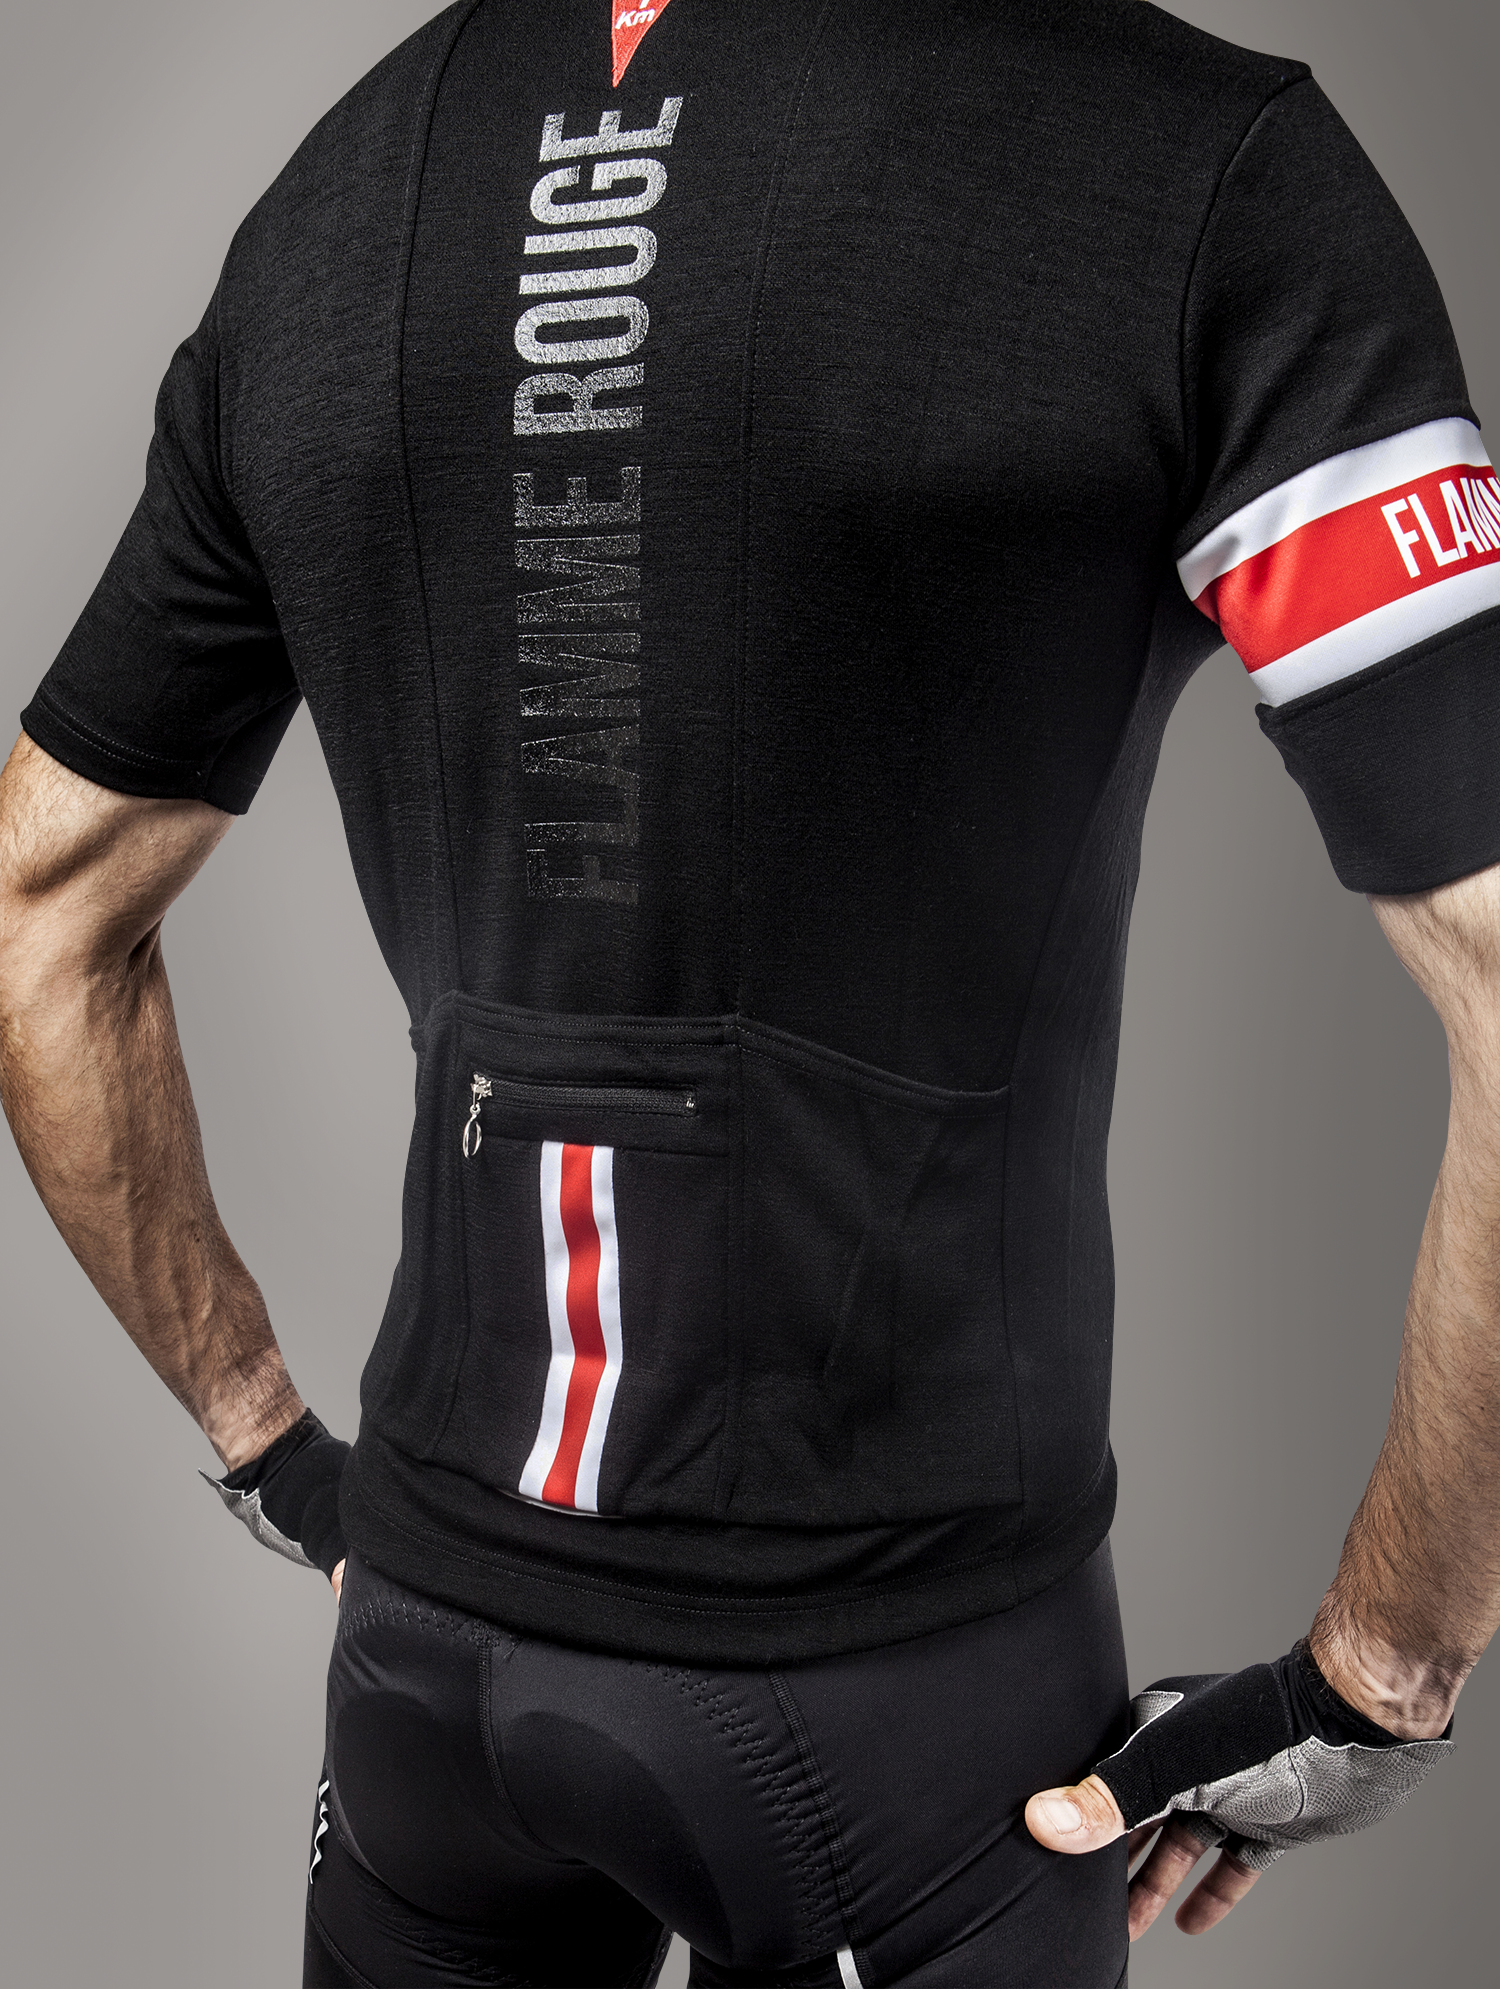 la passione cycling clothing review